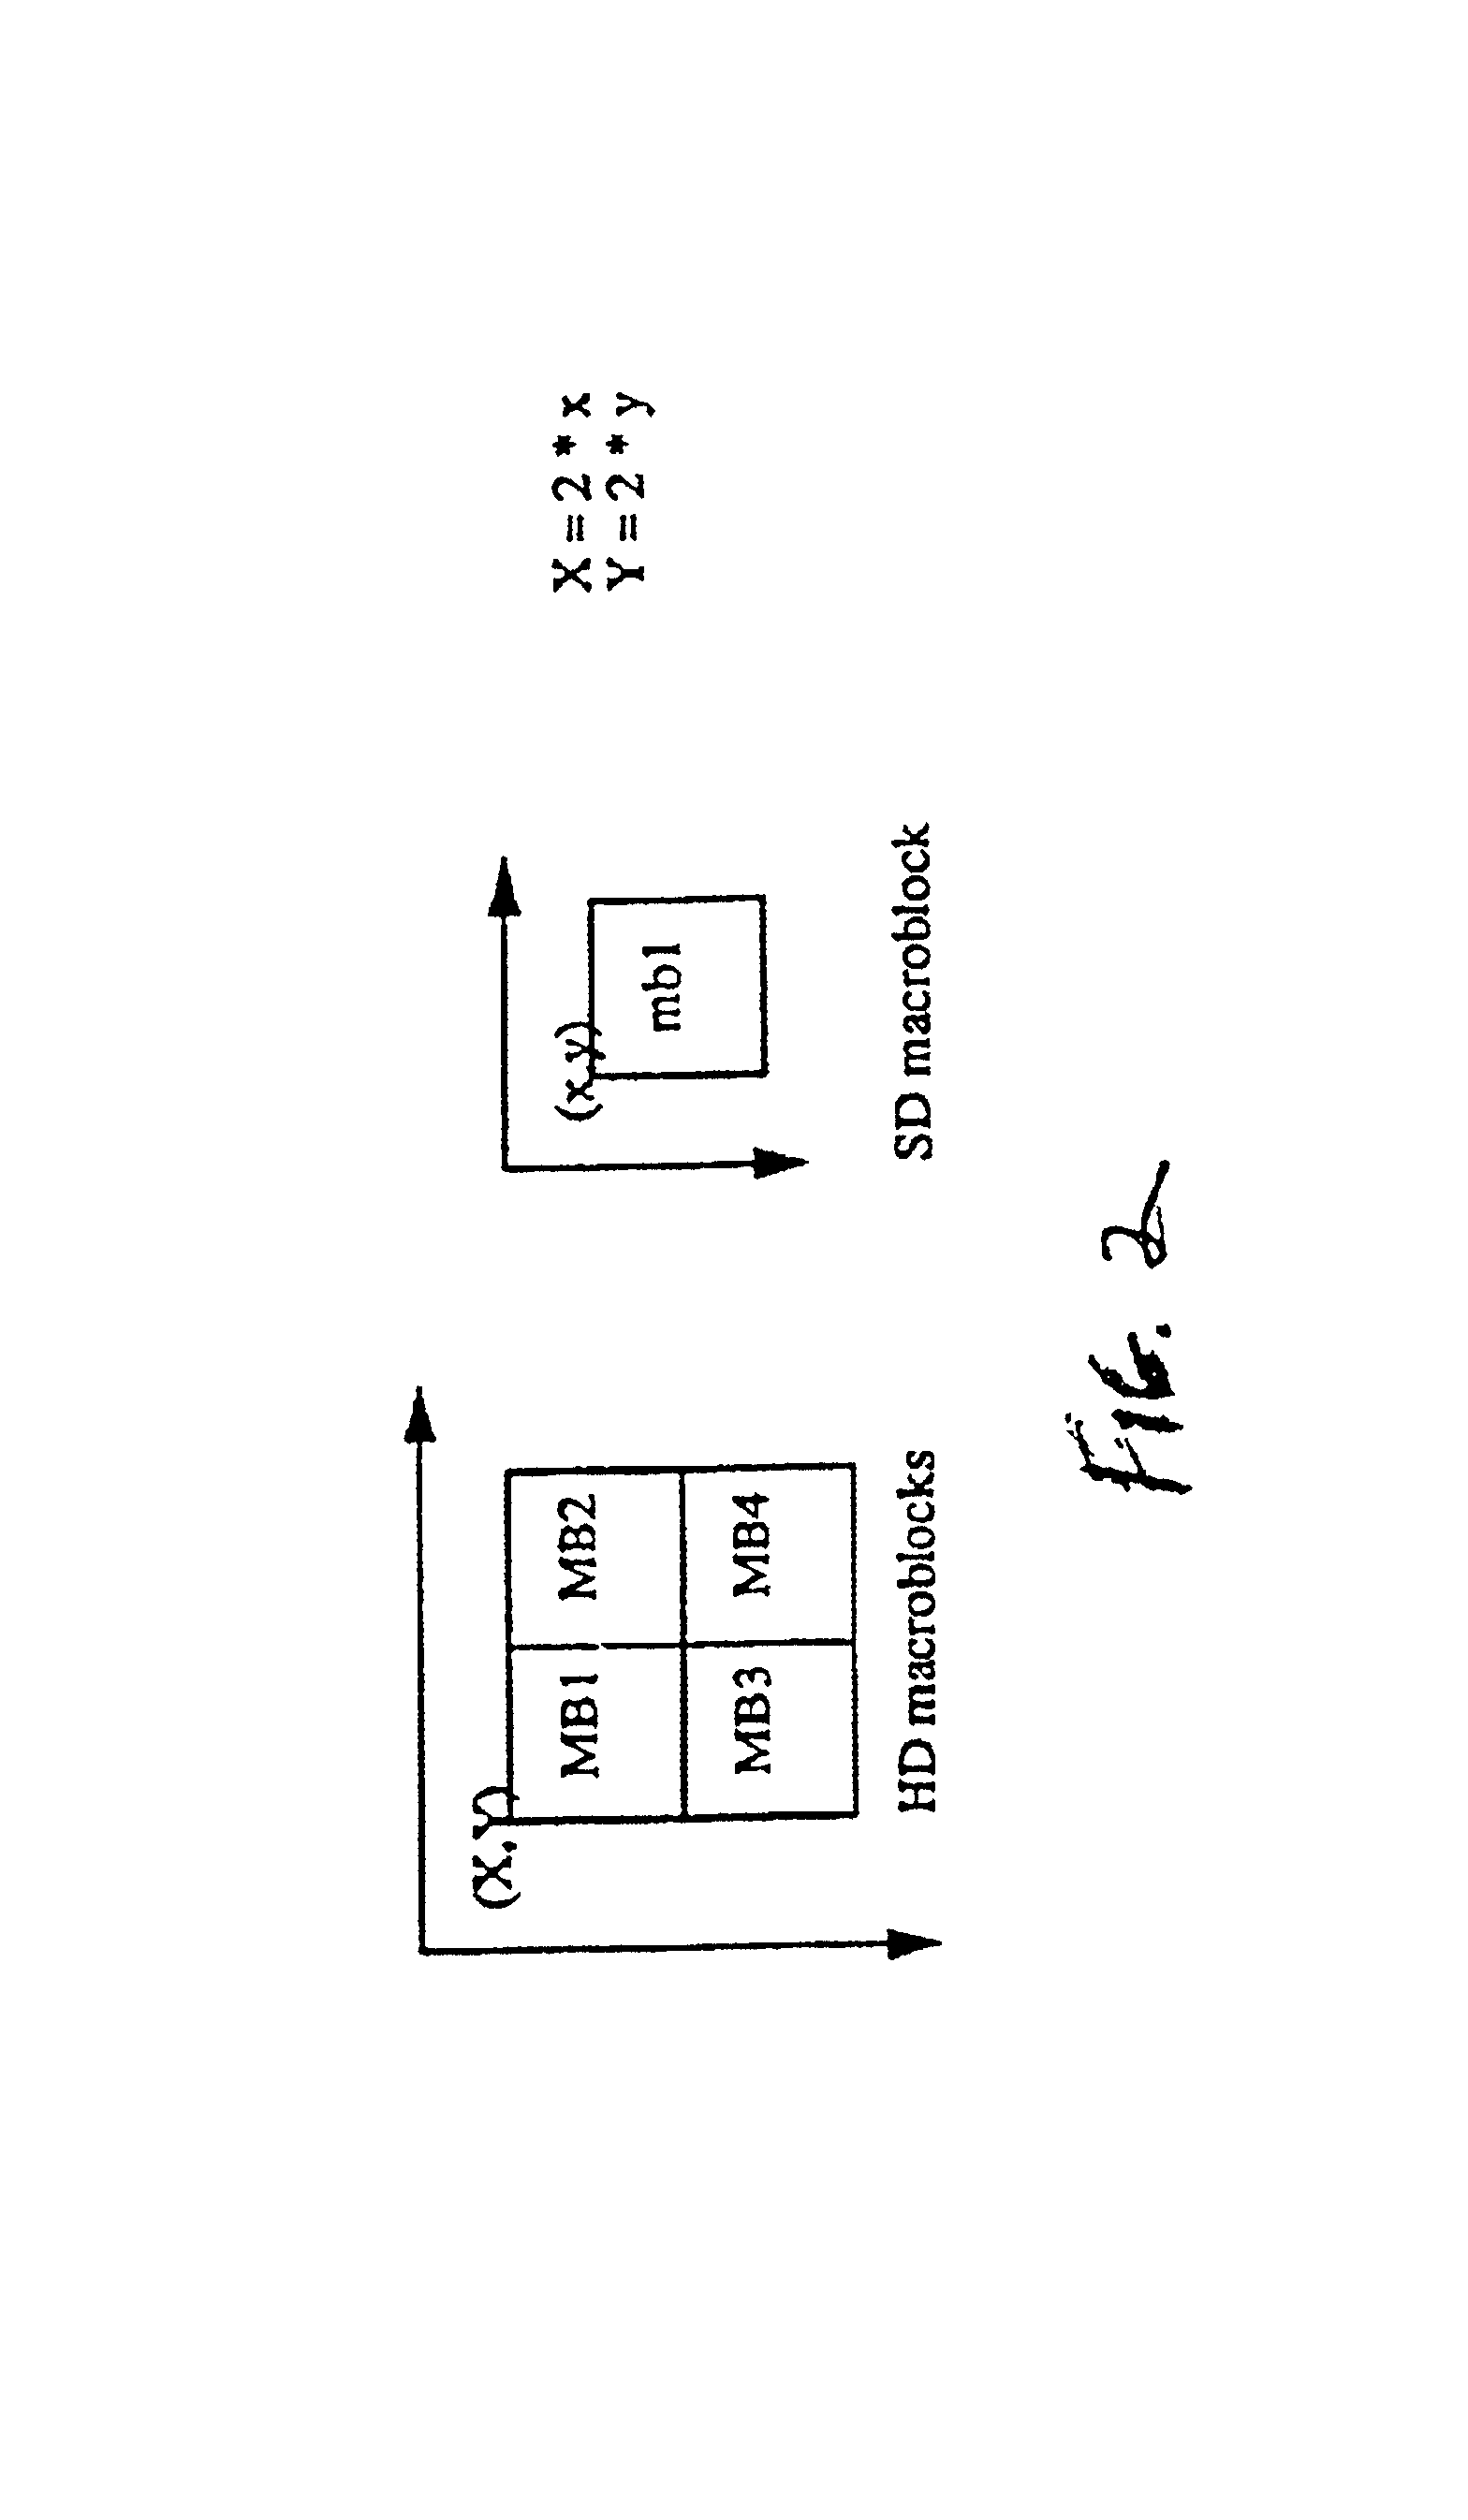 Method and apparatus for transcoding a digitally compressed high definition television bitstream to a standard definition television bitstream